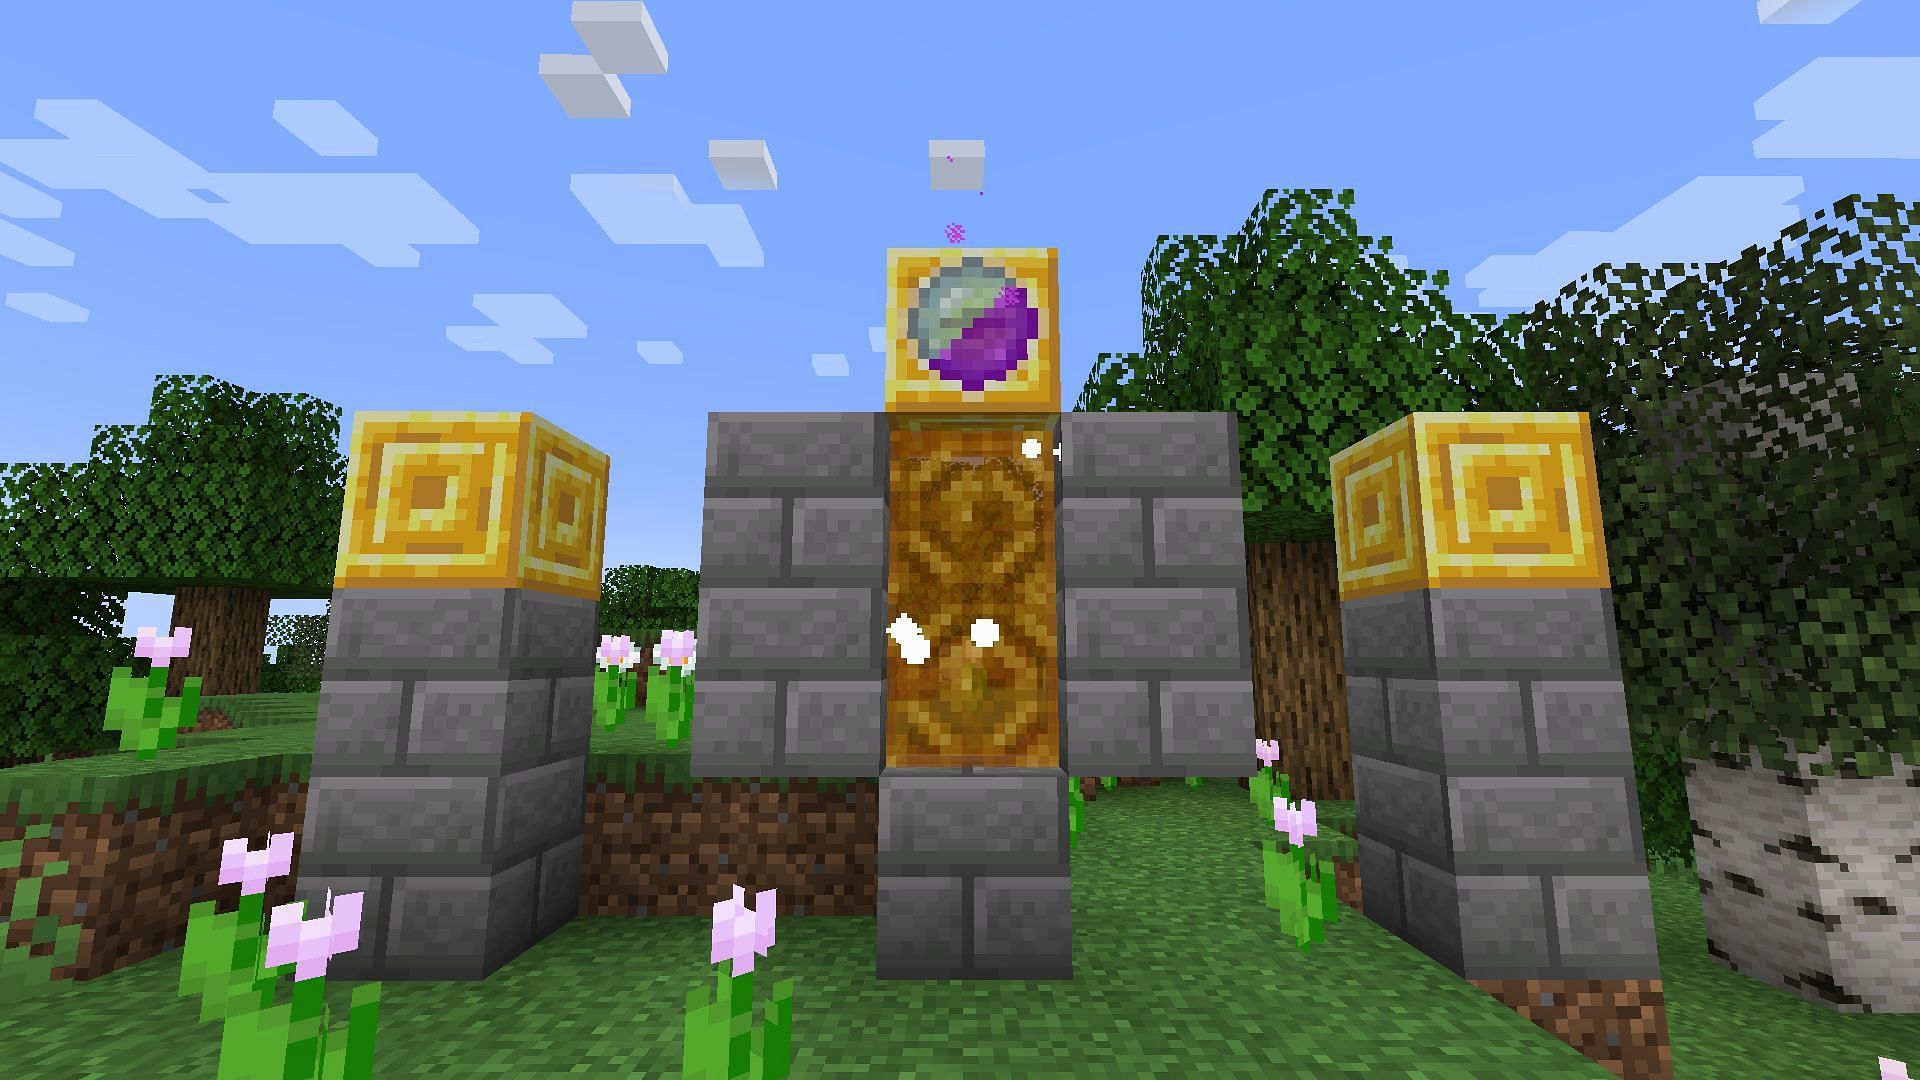 A portal to a dungeon dimension (Image via Minecraft)